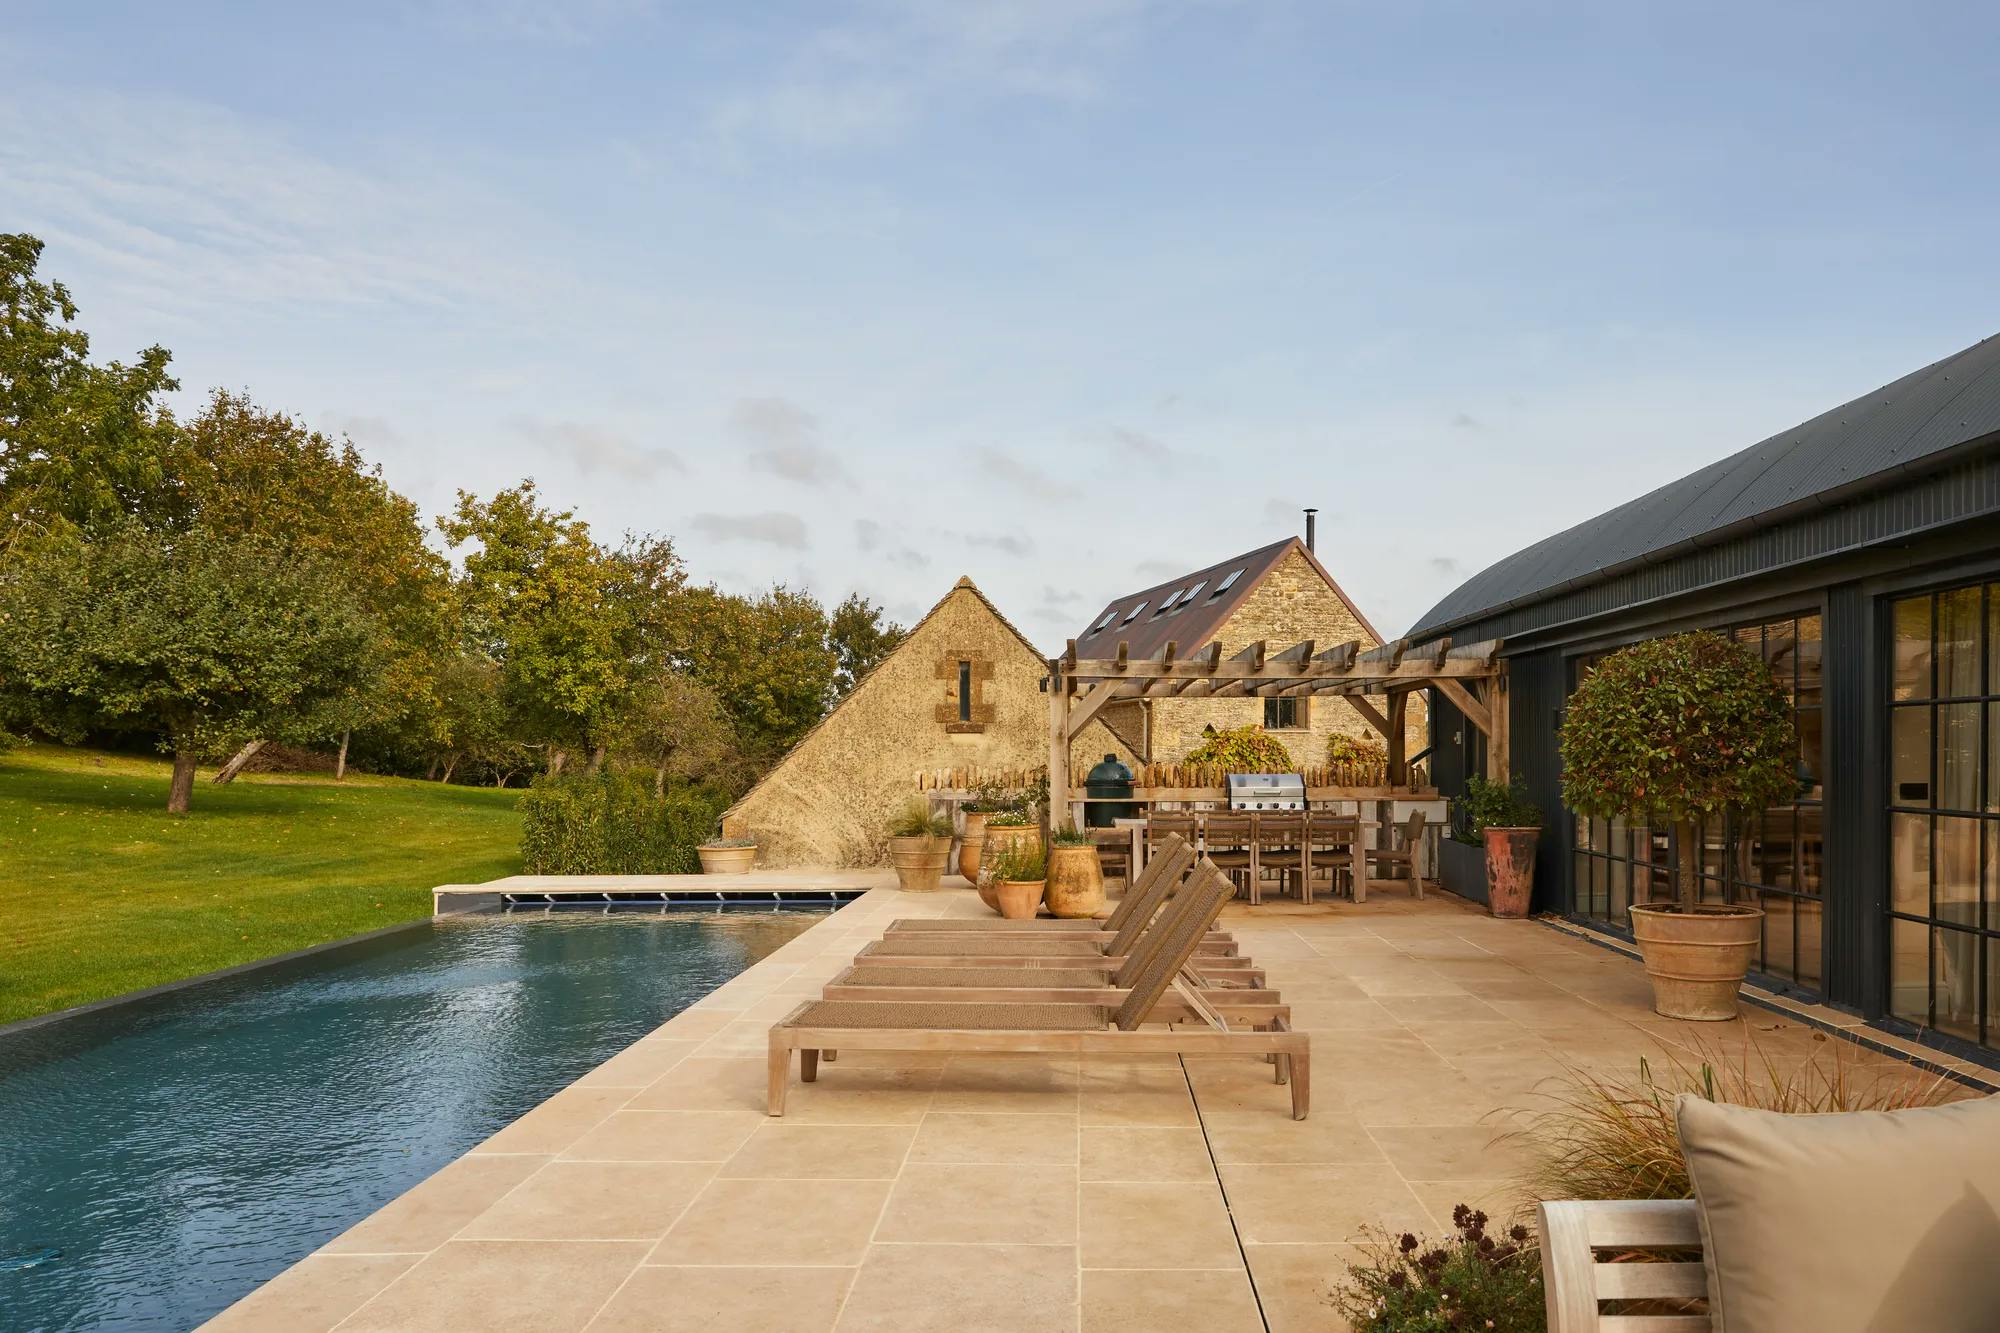 Farmhouse Renovation and Converted Barns With Pool